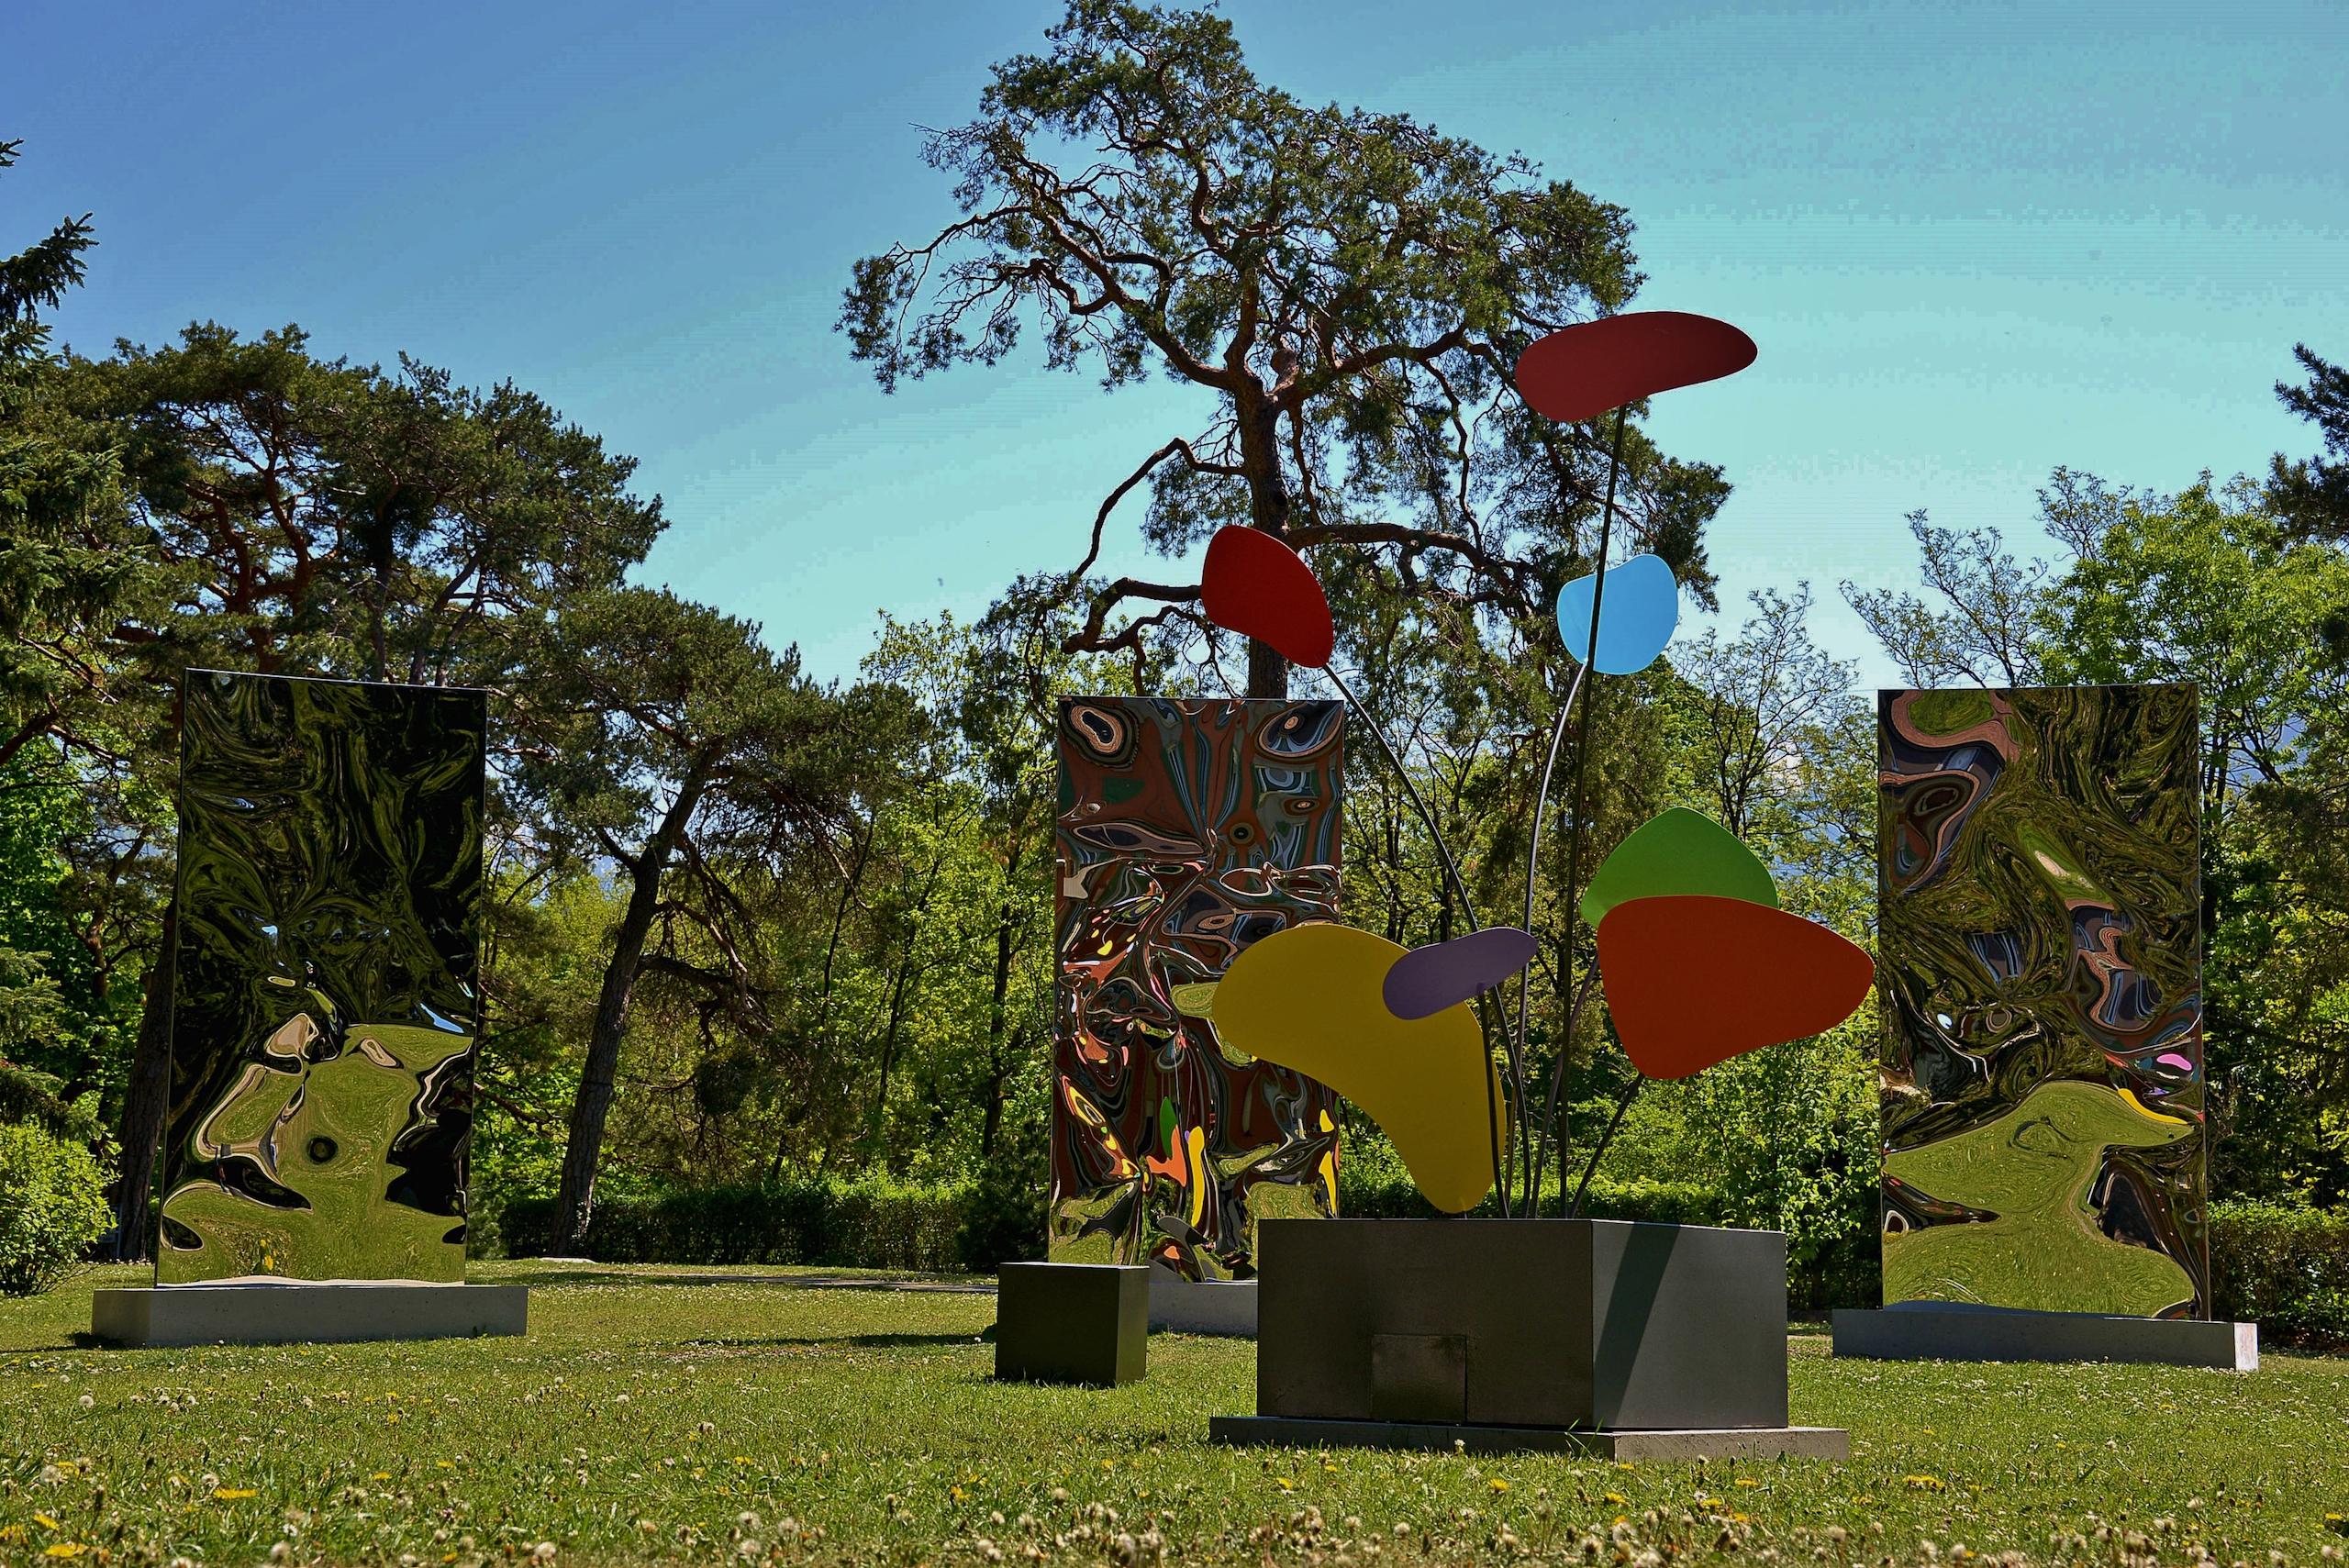 Psyche is a unique installation of three mirror-polished stainless steel sculptures on a concrete base and three painted stainless steel stabiles and bases by contemporary artist Franck K, dimensions are 300 × 510 × 280 cm (118.1 × 200.8 × 110.2